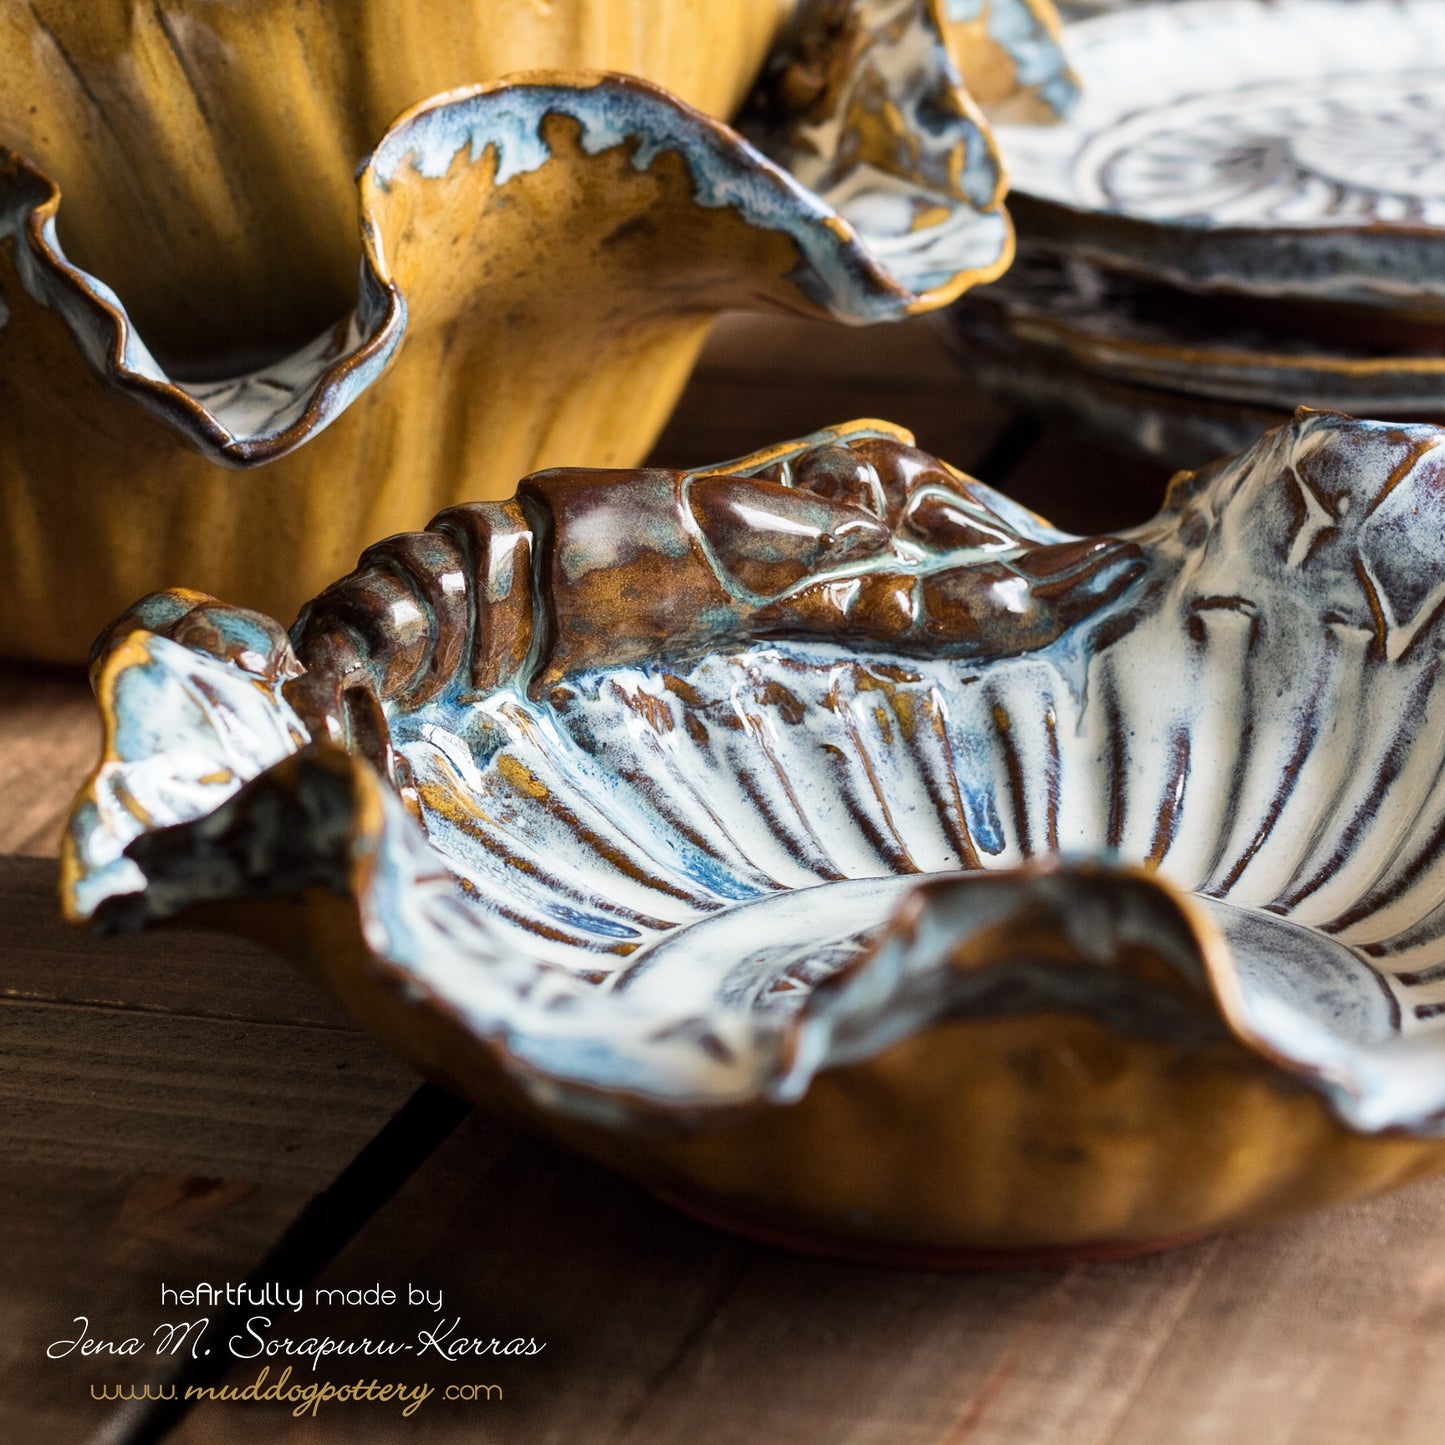 The Blue Crawfish (Krevis Blé) with Gold Accents Small Serving Bowl